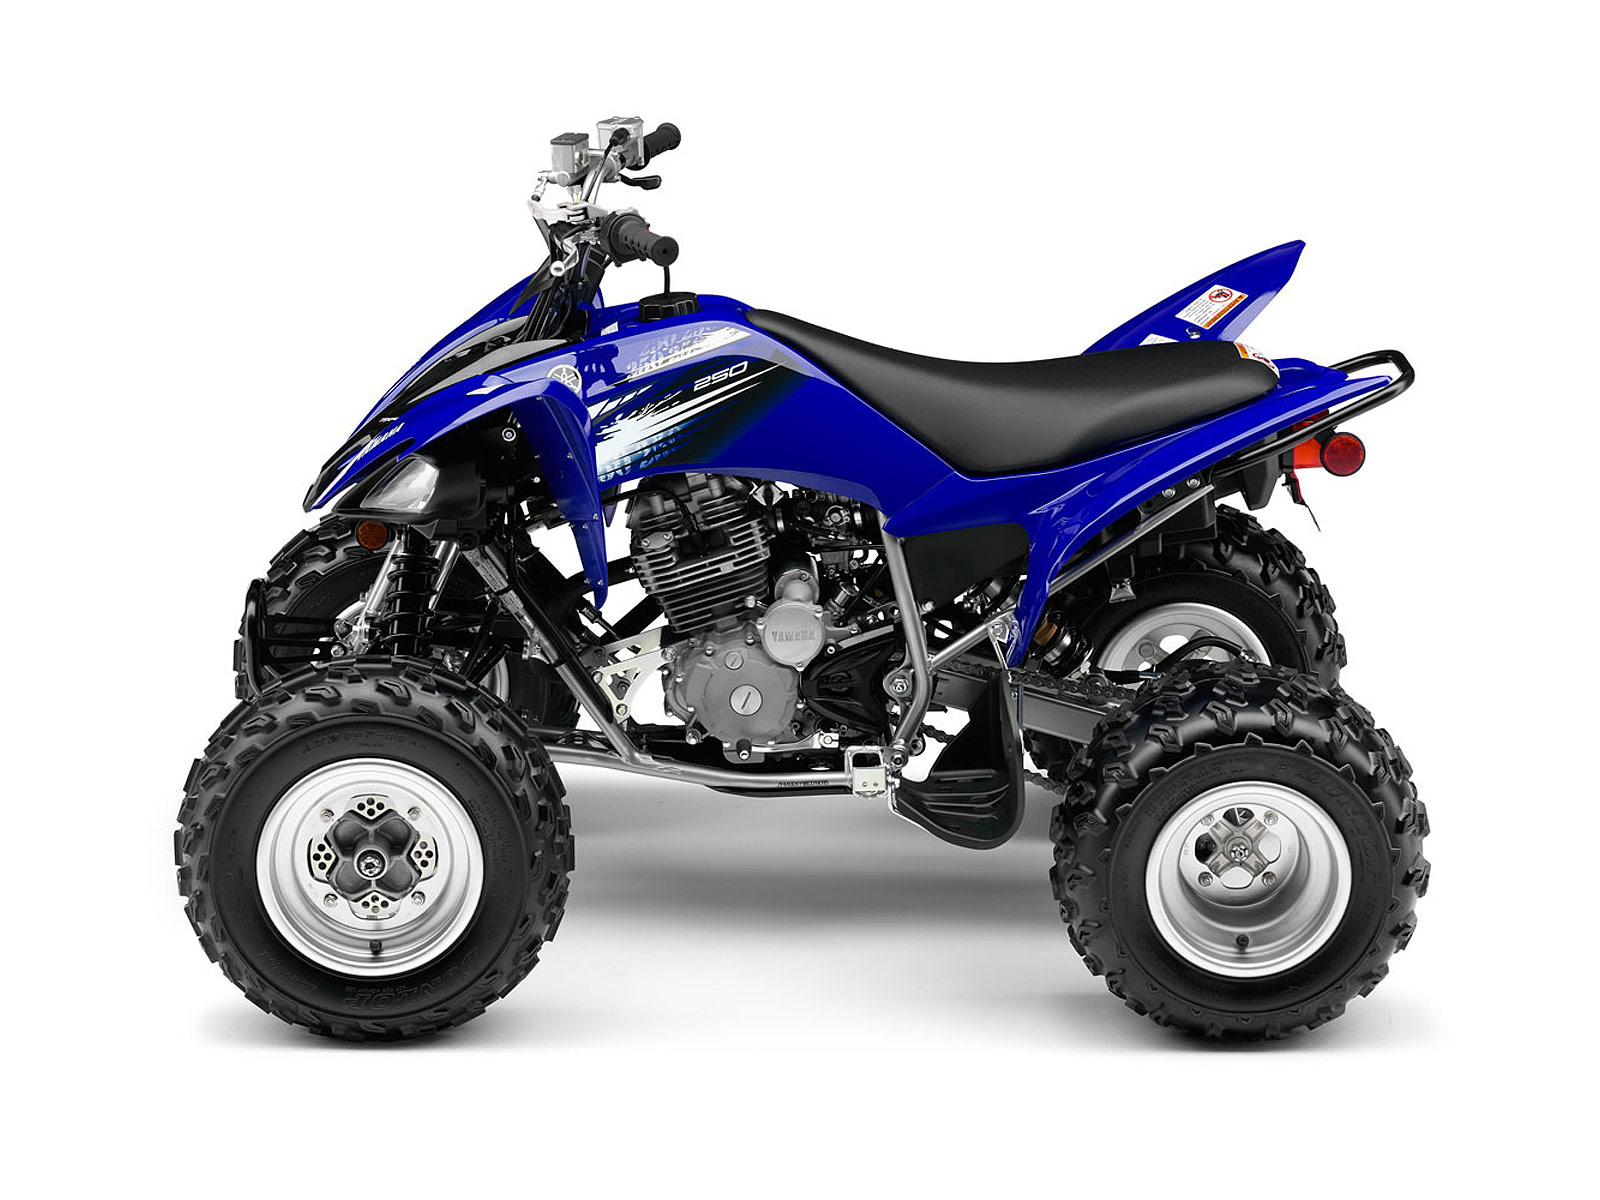 2012 YAMAHA Raptor 250 ATV pictures, review, specifications